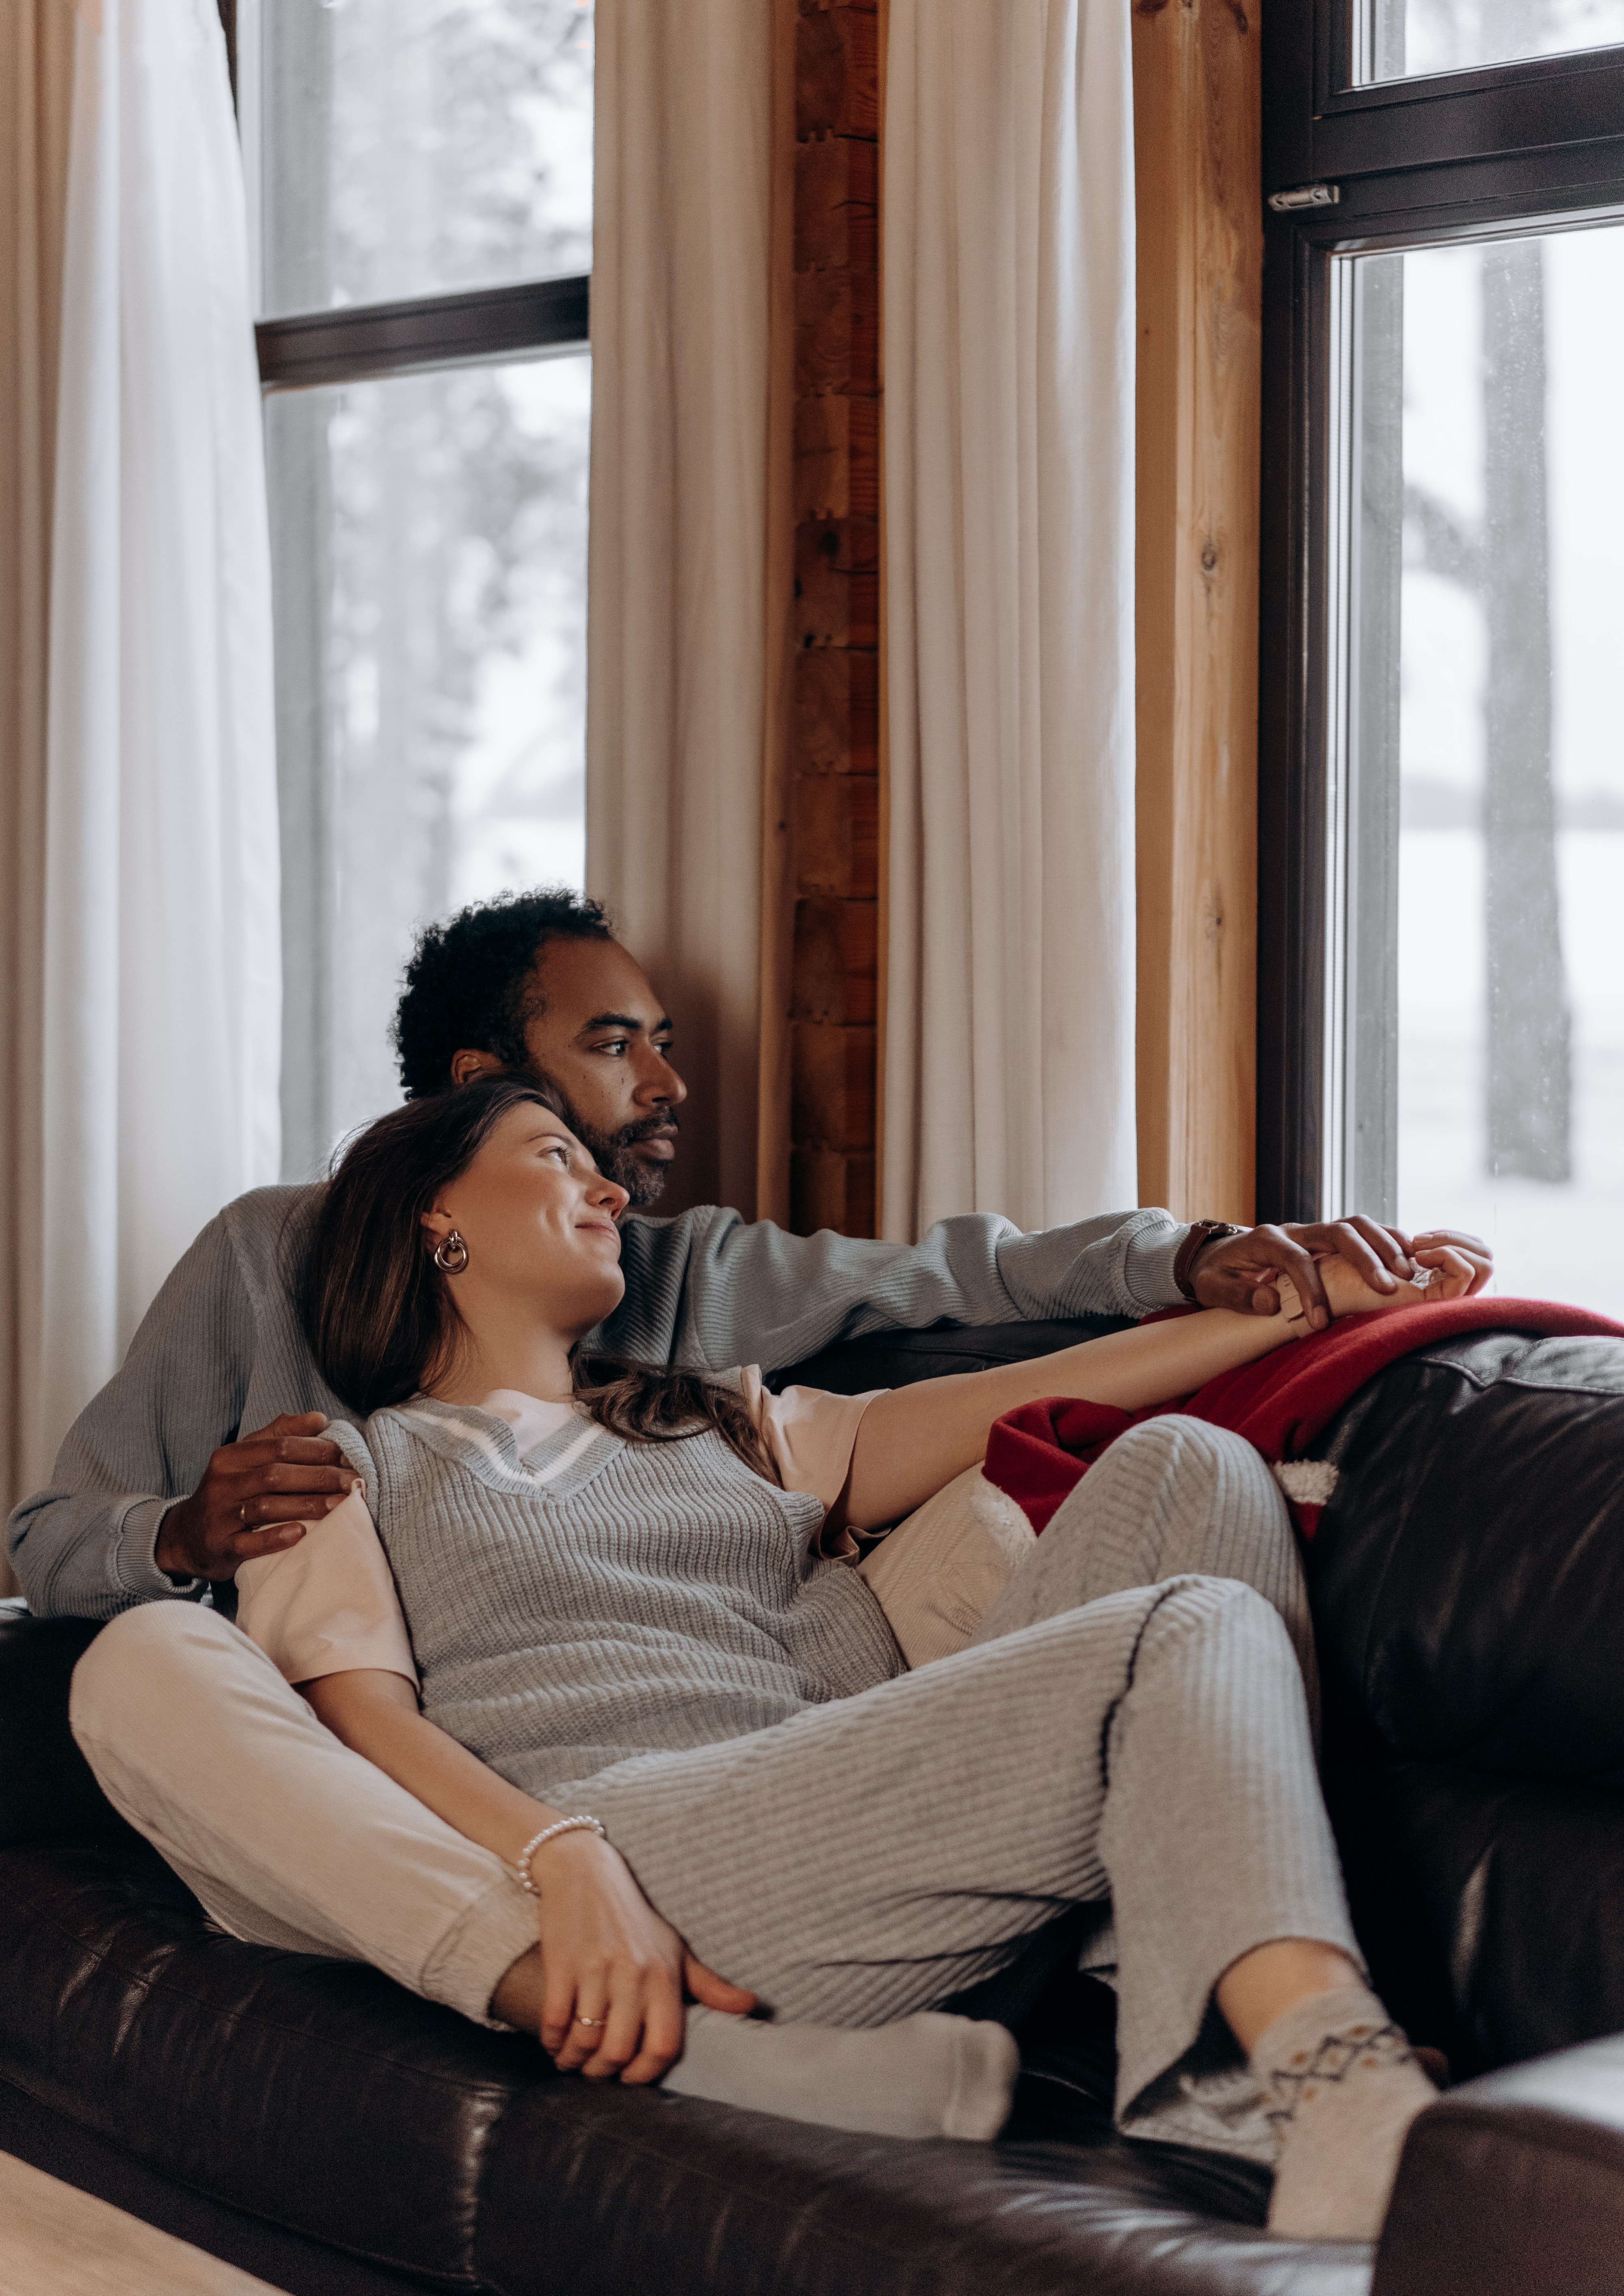 Man And Woman On Couch. | Source: Pexels